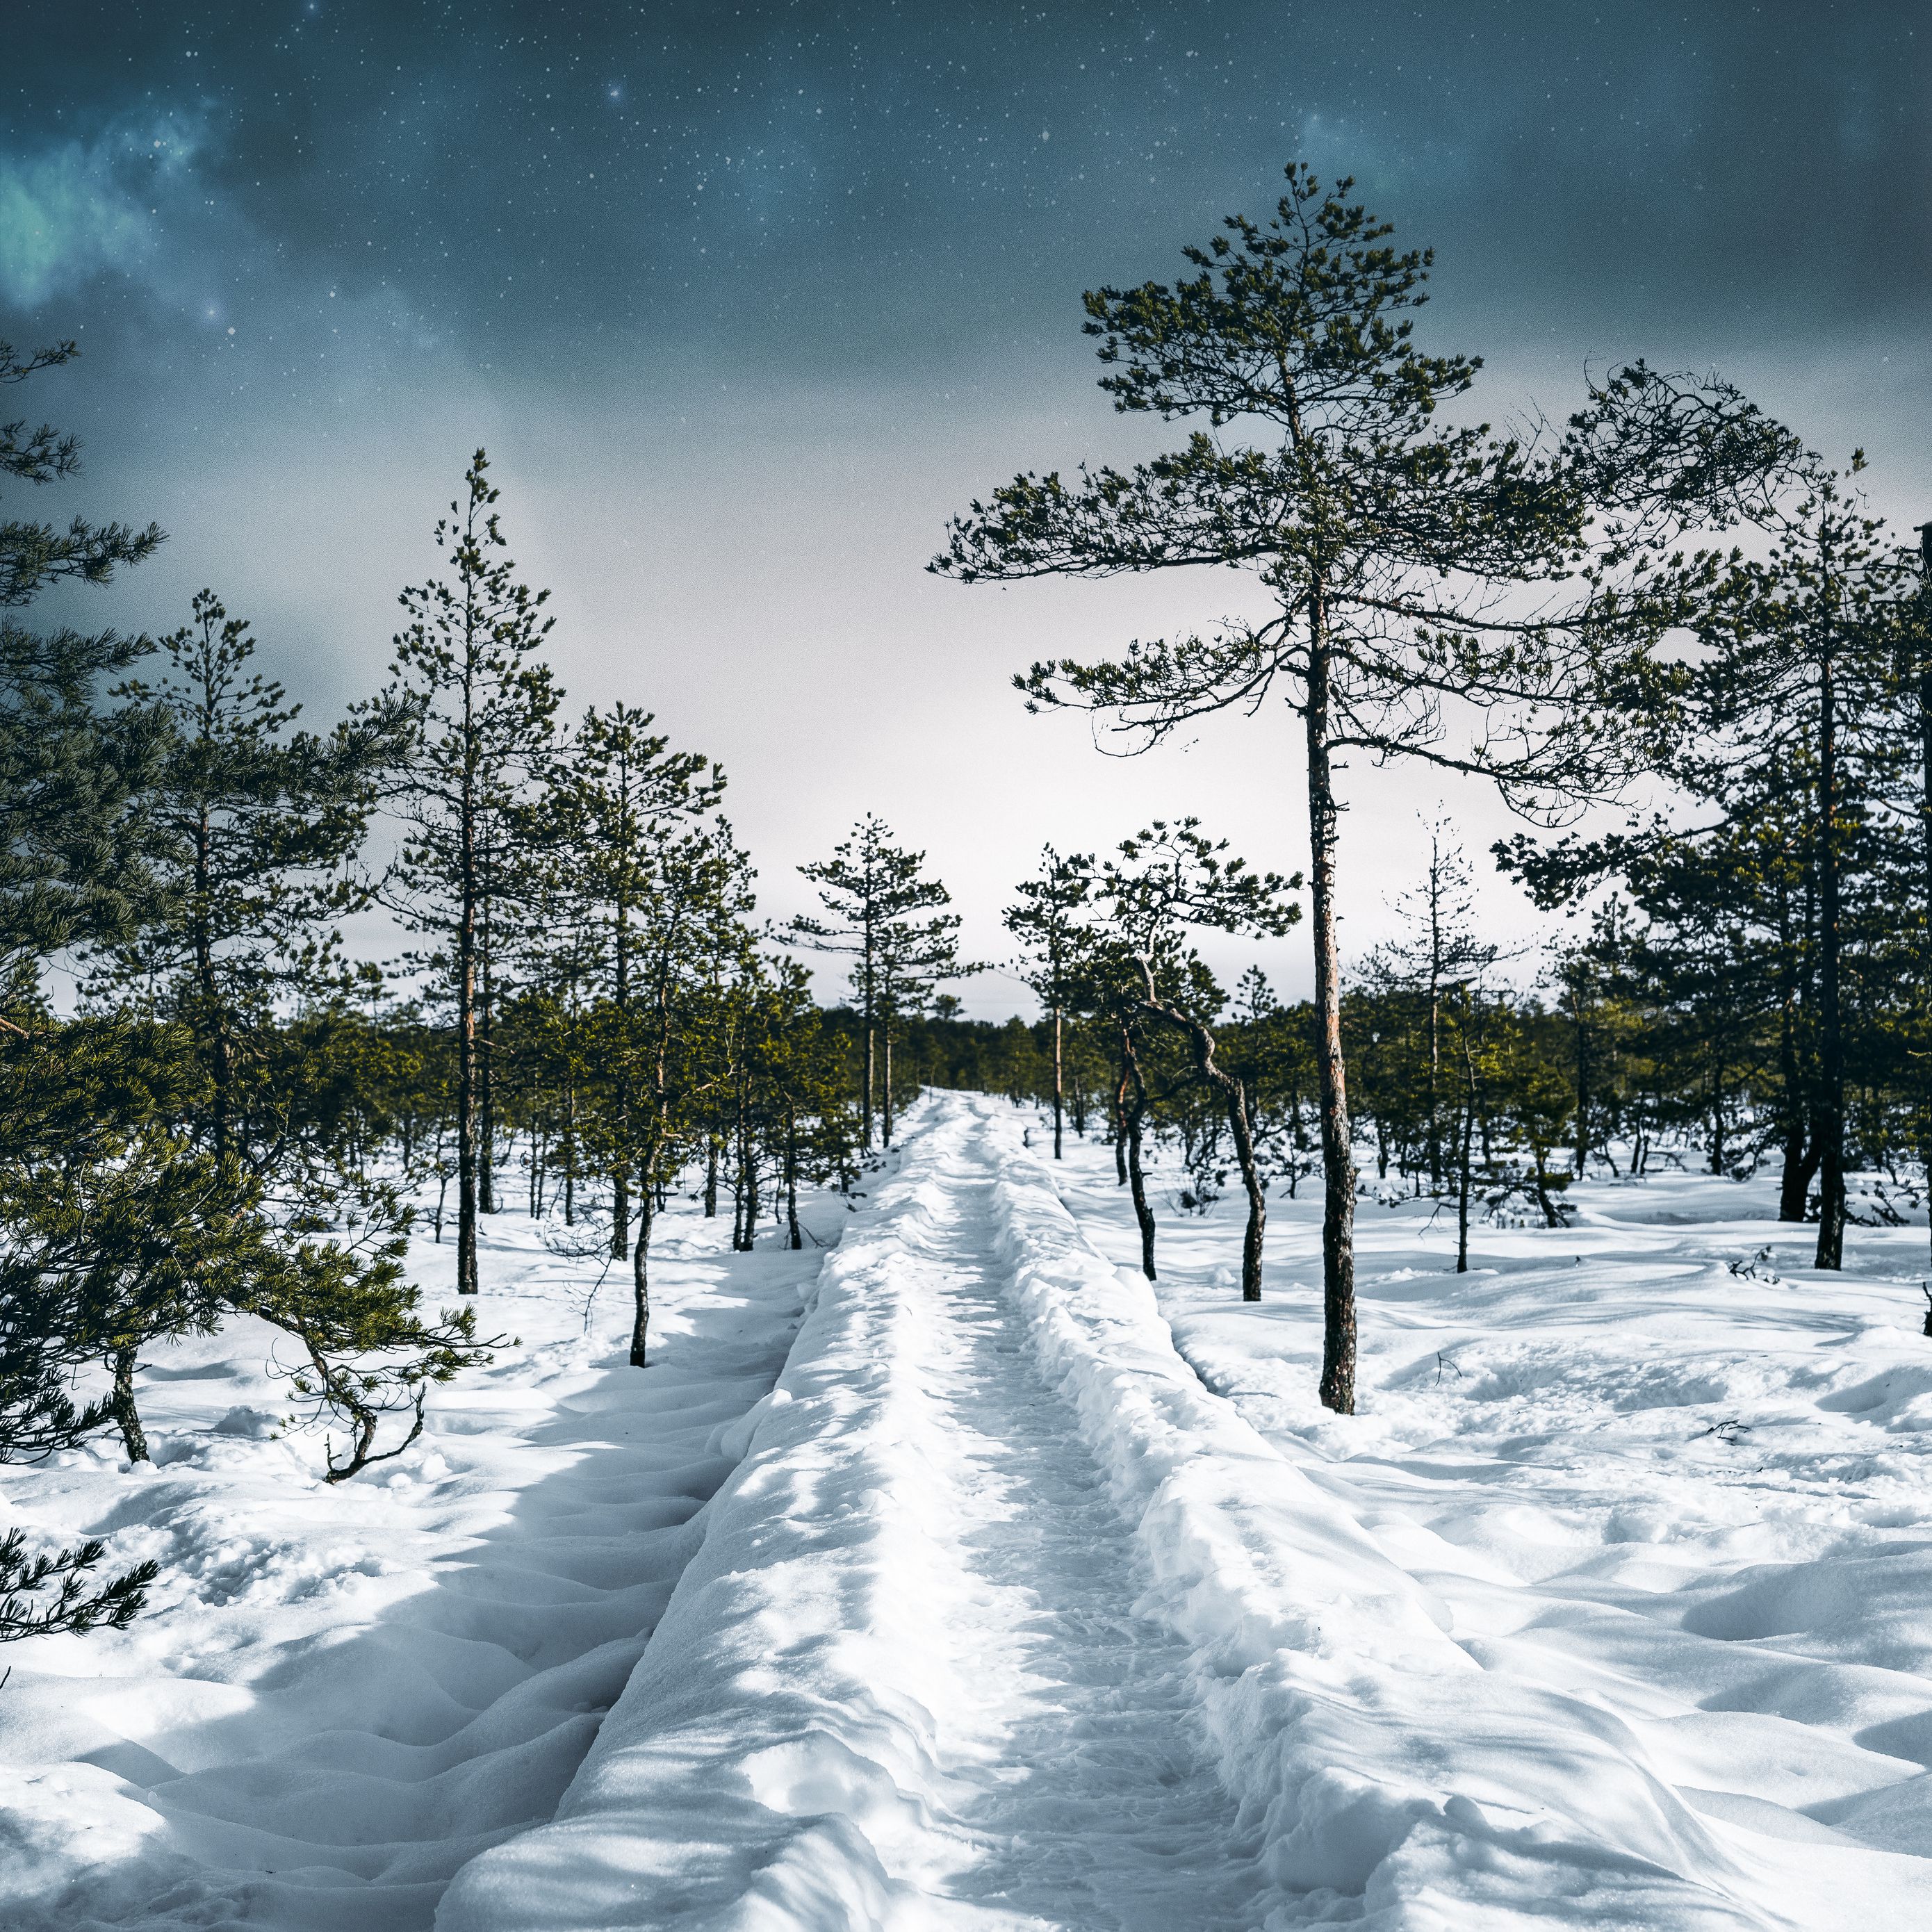 Download wallpaper 2780x2780 snow, path, trees, forest, sky, winter ipad air, ipad air ipad ipad ipad mini ipad mini ipad mini ipad pro 9.7 for parallax HD background